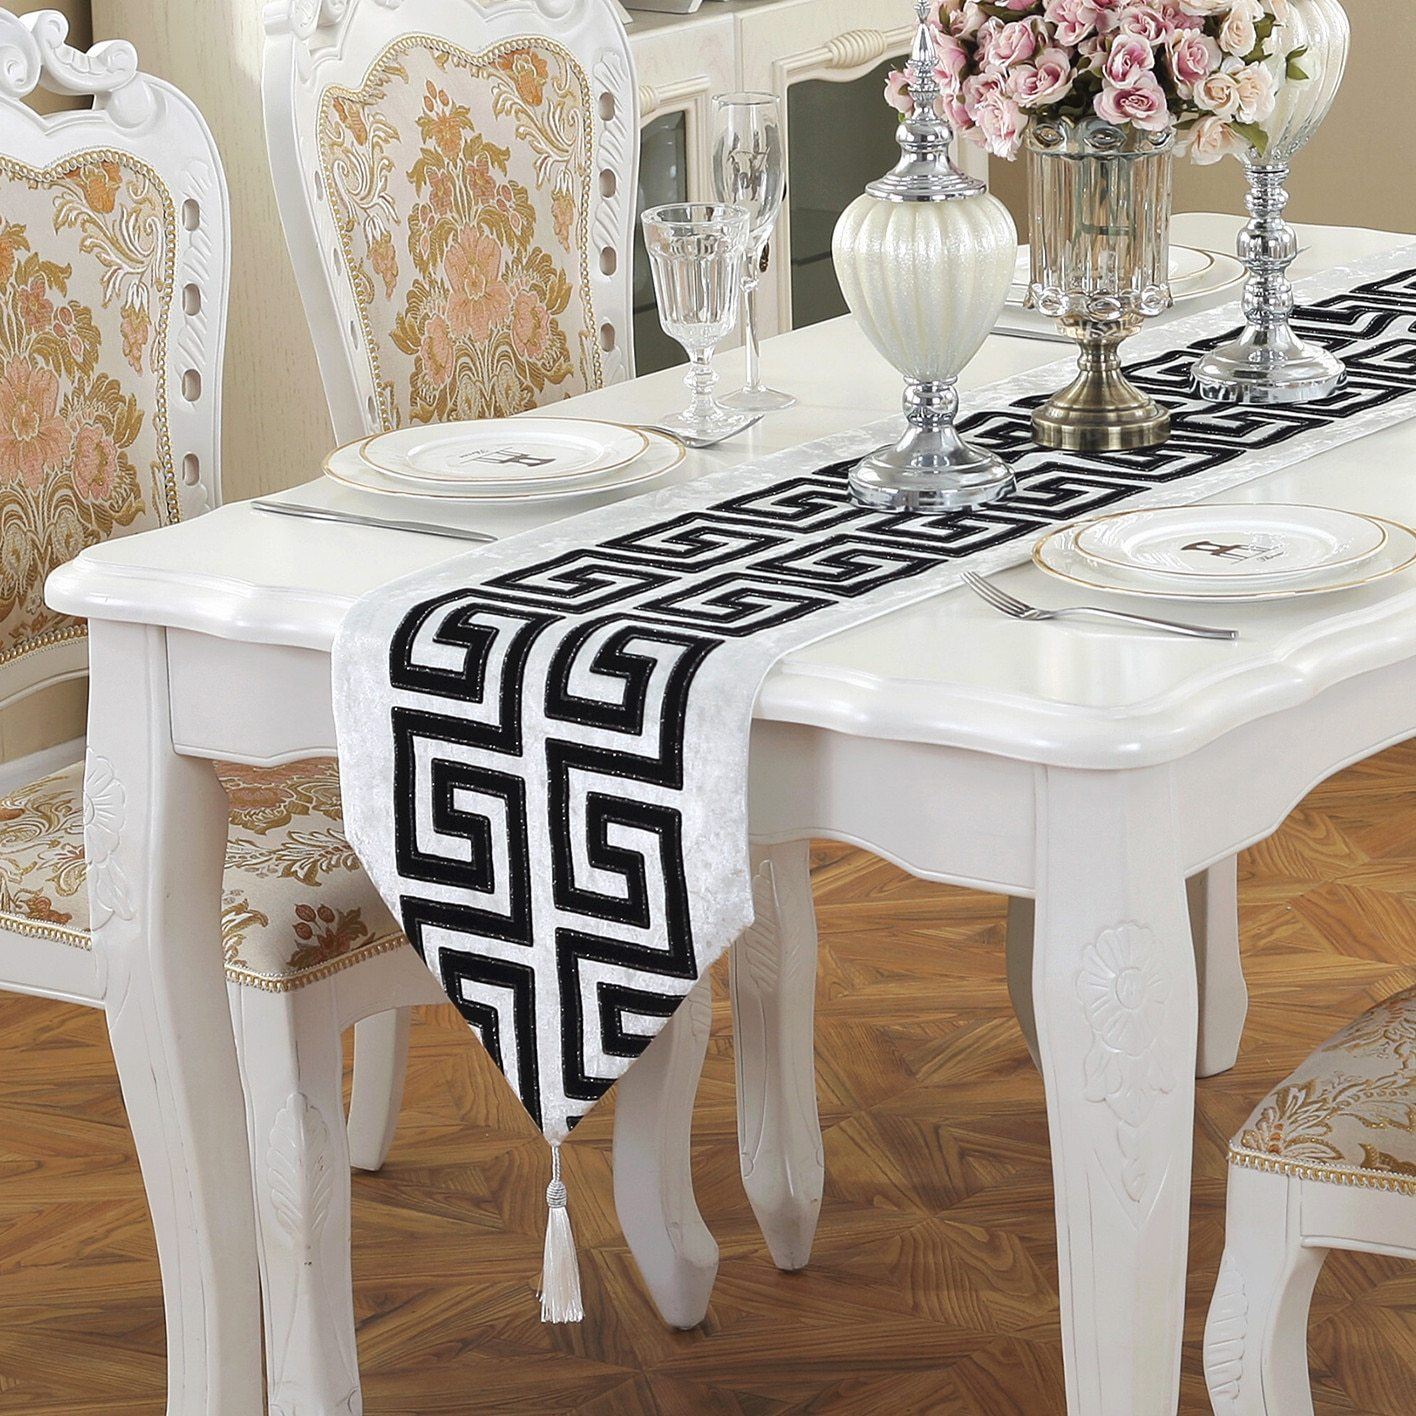 Area Retro Black and White Table Runner - Area Collections